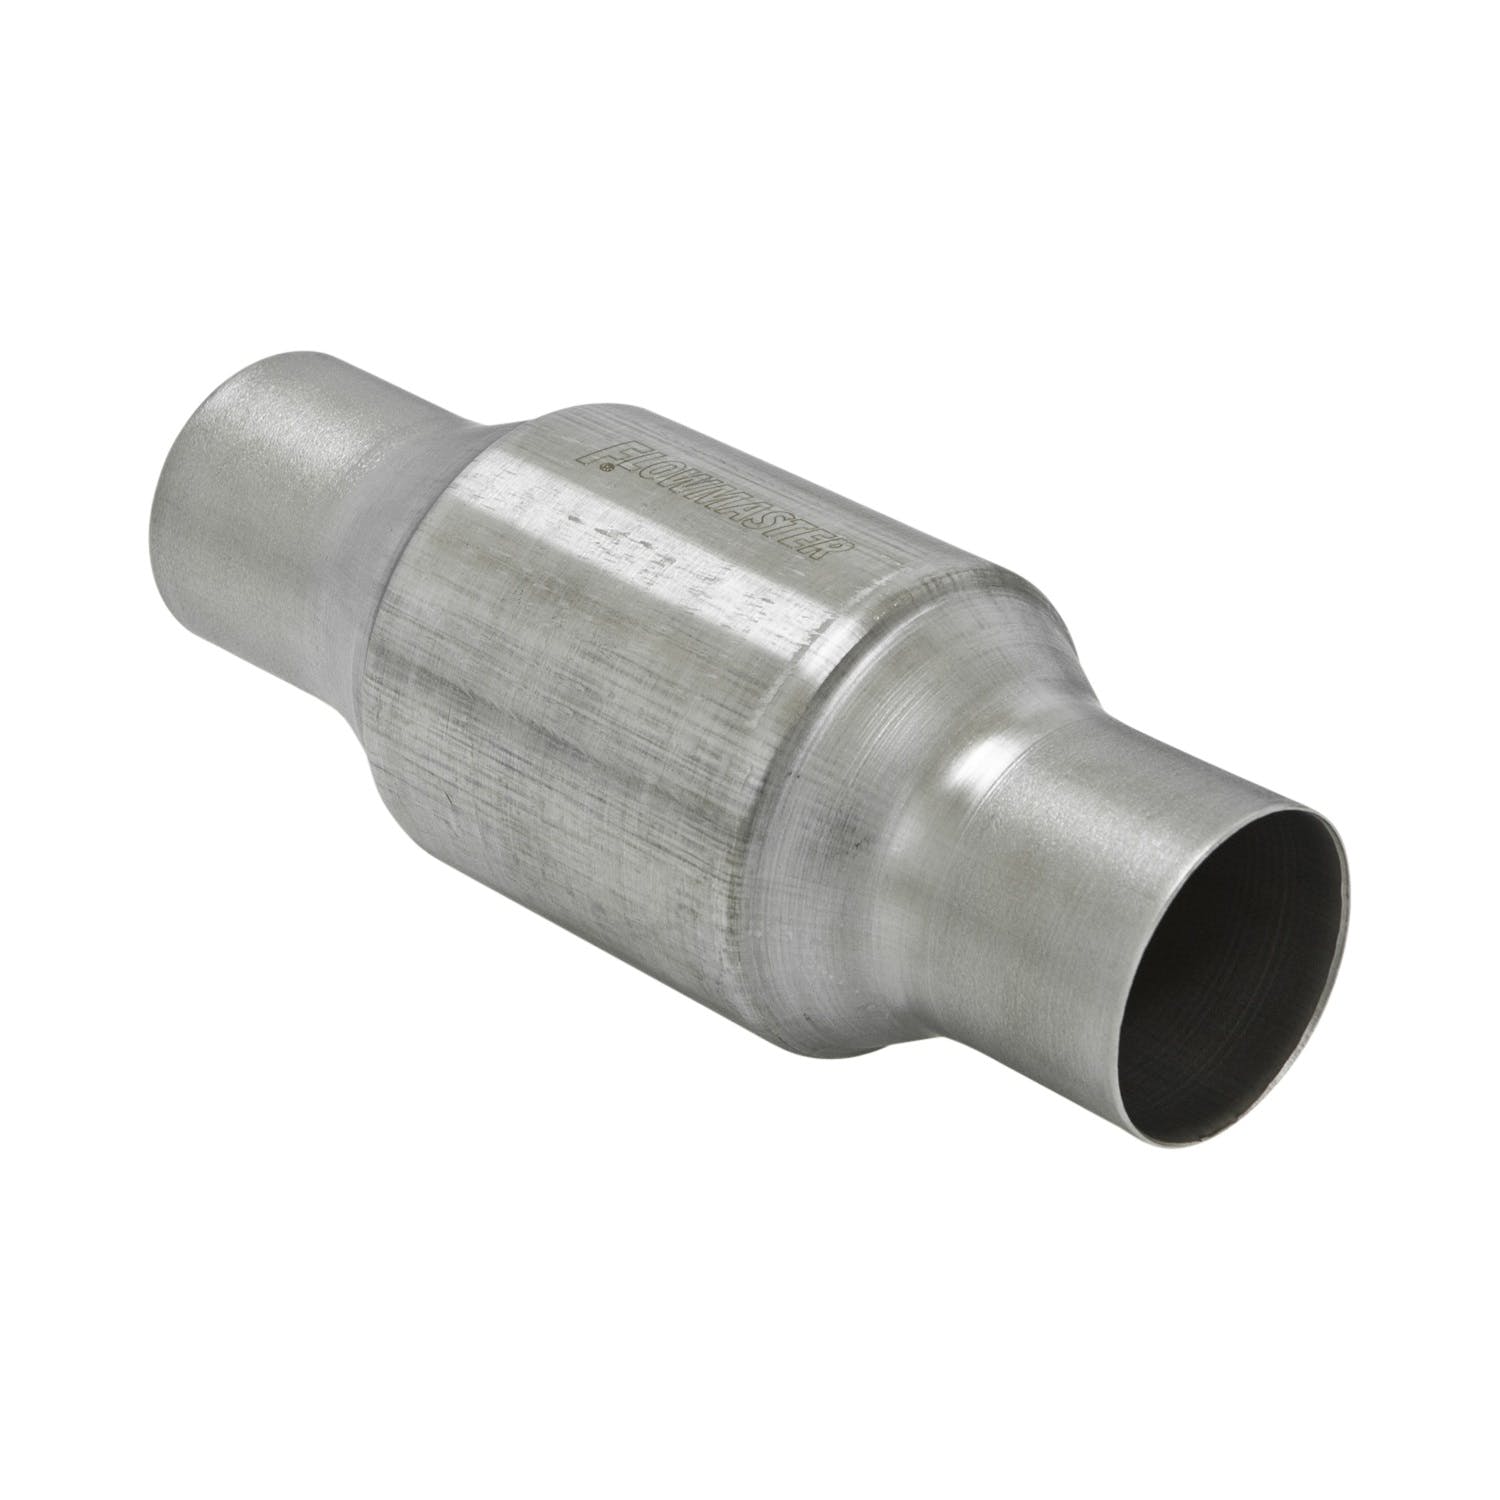 Flowmaster Catalytic Converters 2230125 Catalytic Converter-Universal-223 Series-2.50 in. Inlet/Outlet-49 State